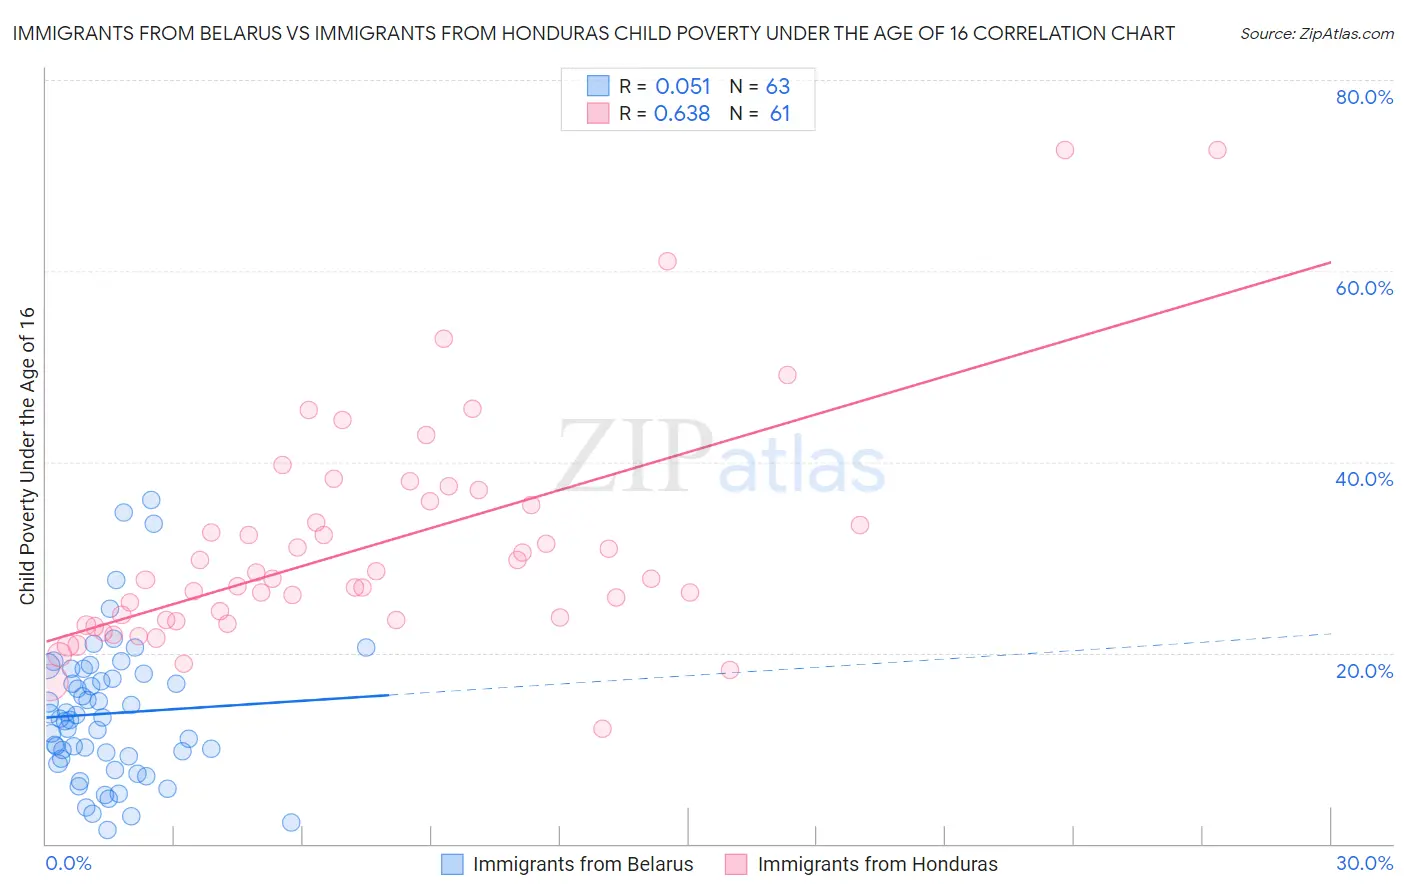 Immigrants from Belarus vs Immigrants from Honduras Child Poverty Under the Age of 16